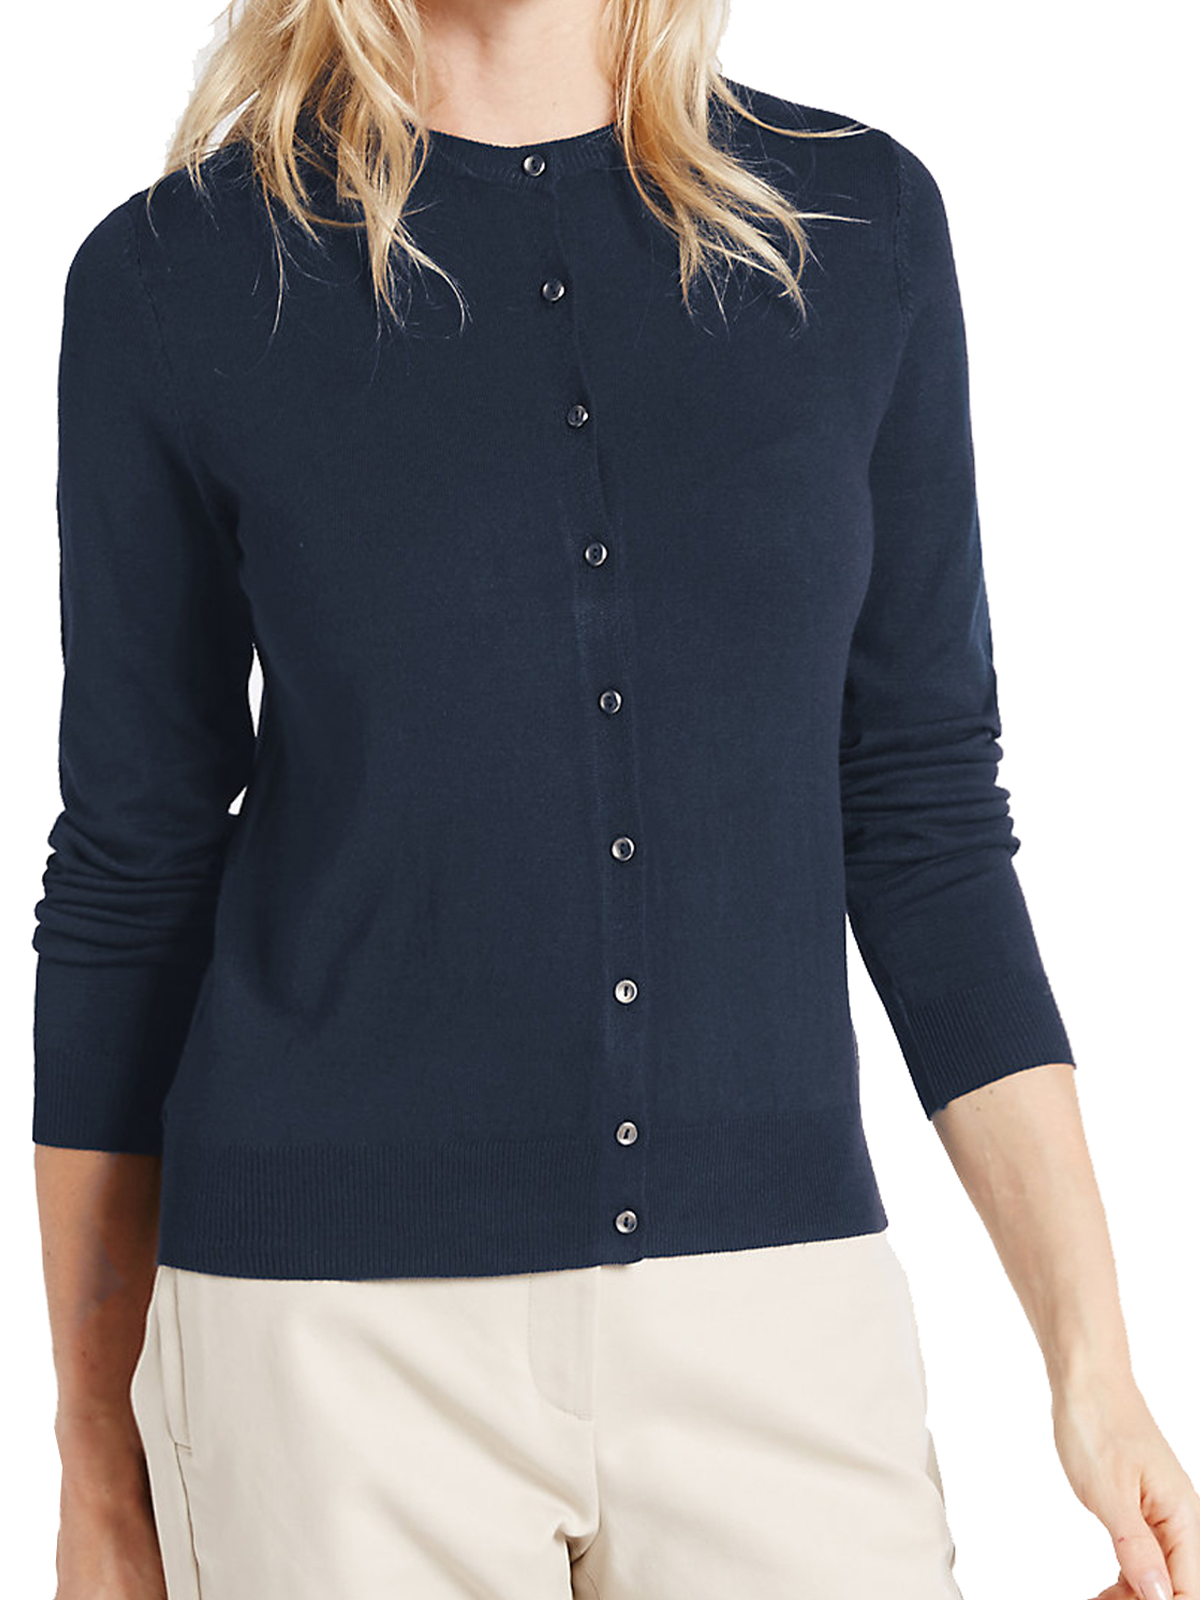 Marks and Spencer - - M&5 NAVY Ribbed Round Neck Button Through